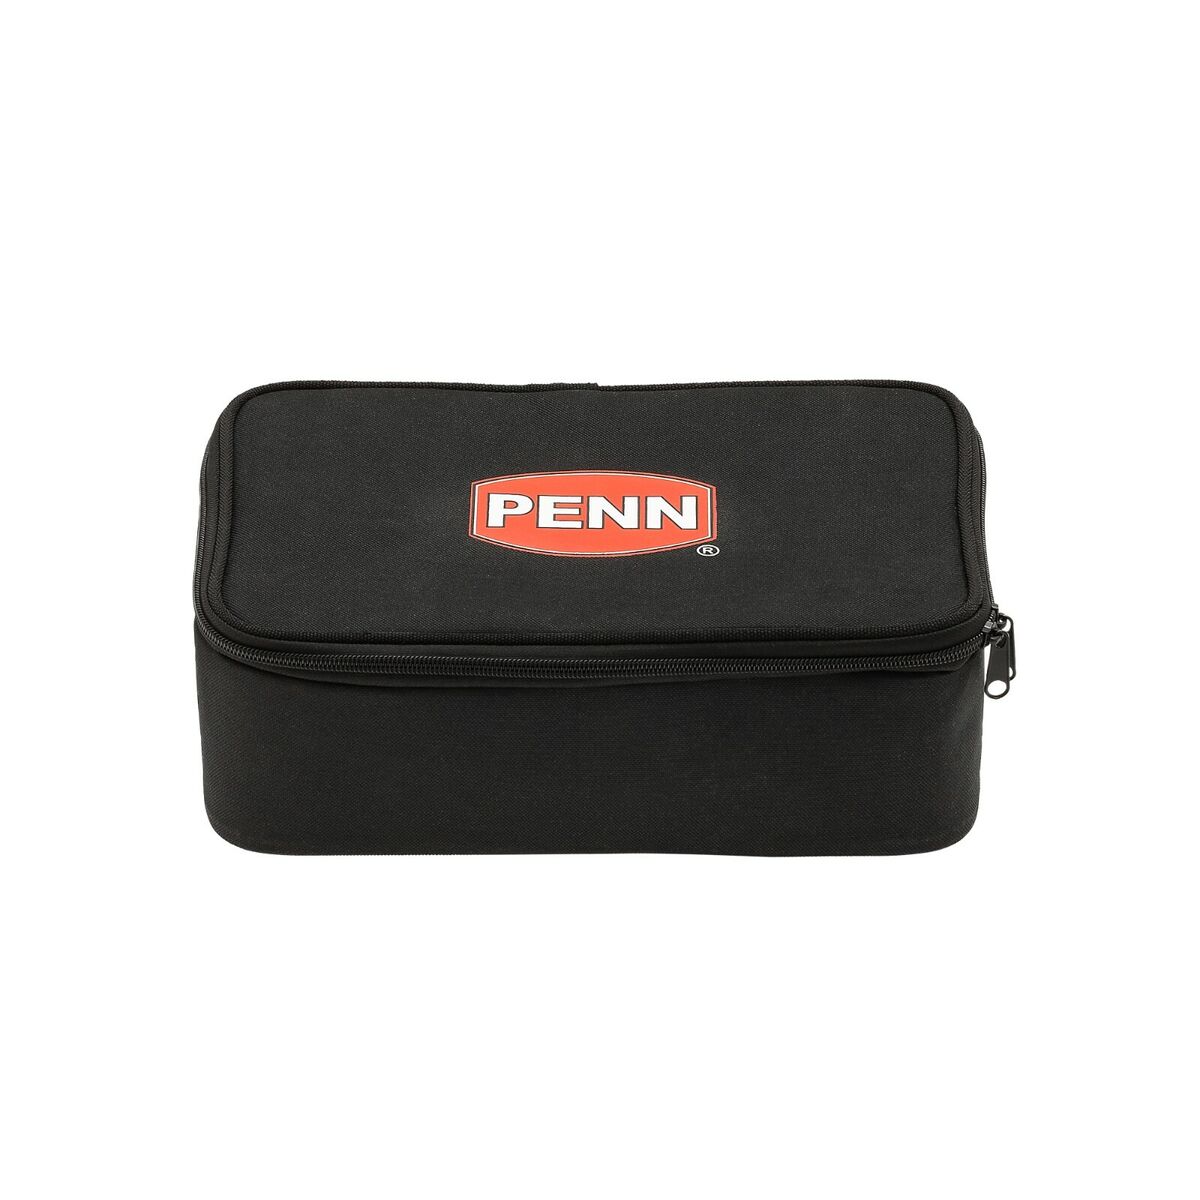 PENN NEW Fishing Reel Case / Bag - Fits Reels Up To Size 8000 - 1527944